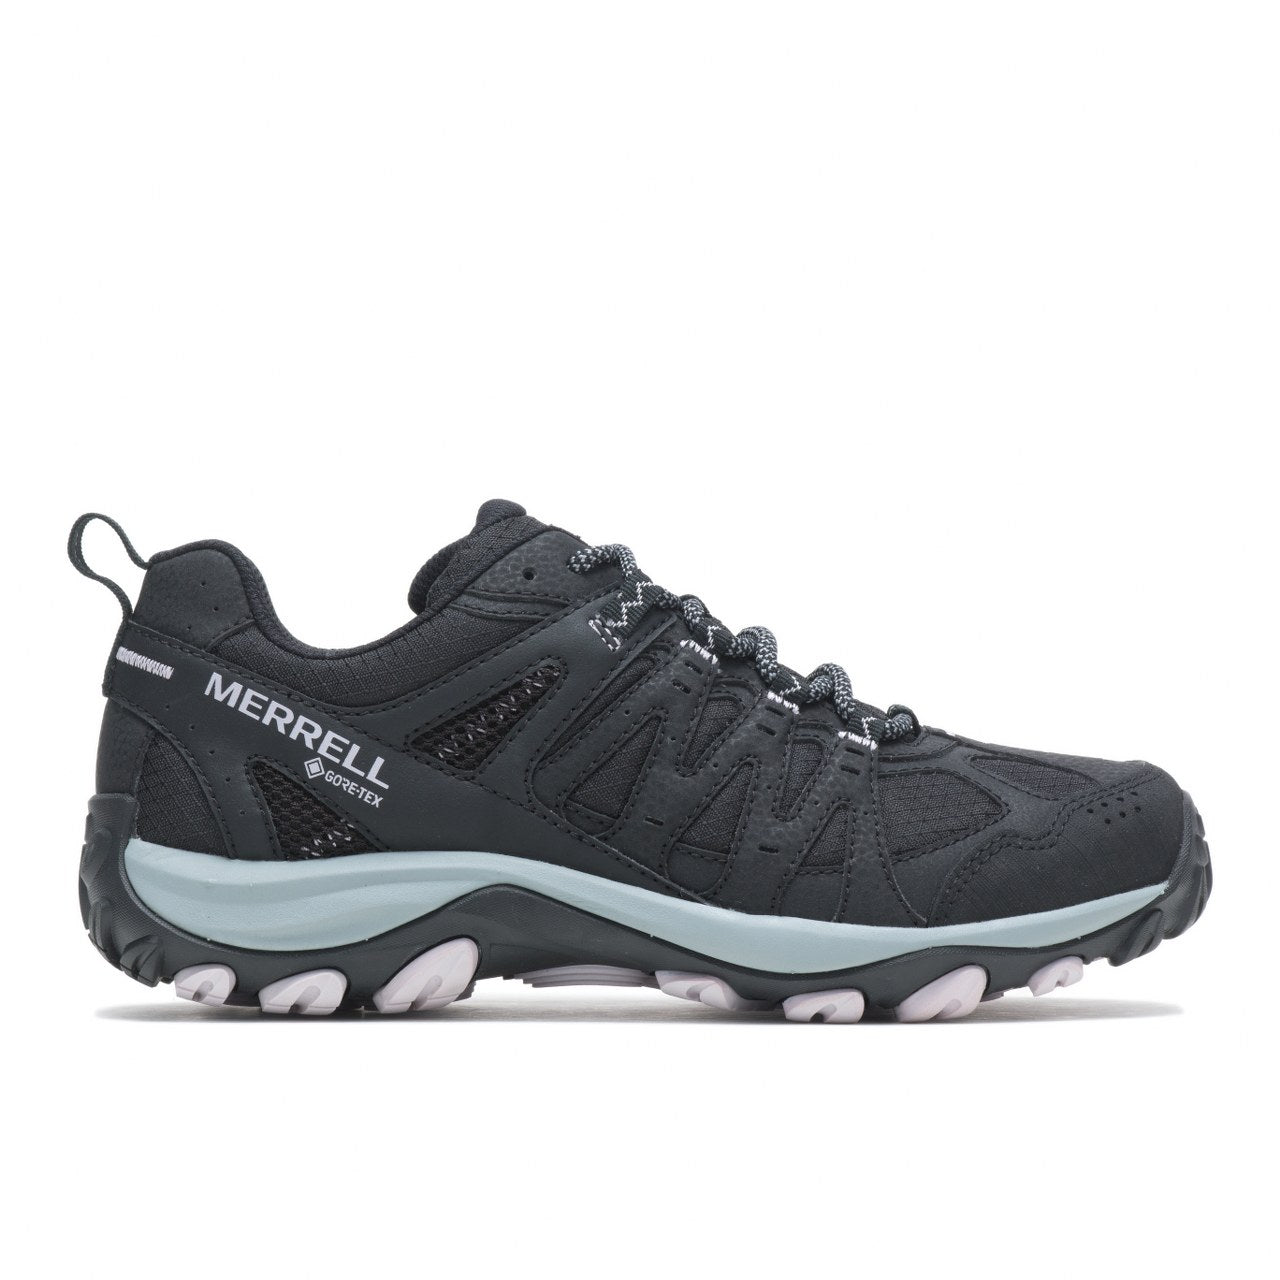 Accentor 3 Sport Gore-Tex-Black Womens Hiking Shoes | Merrell Online Store